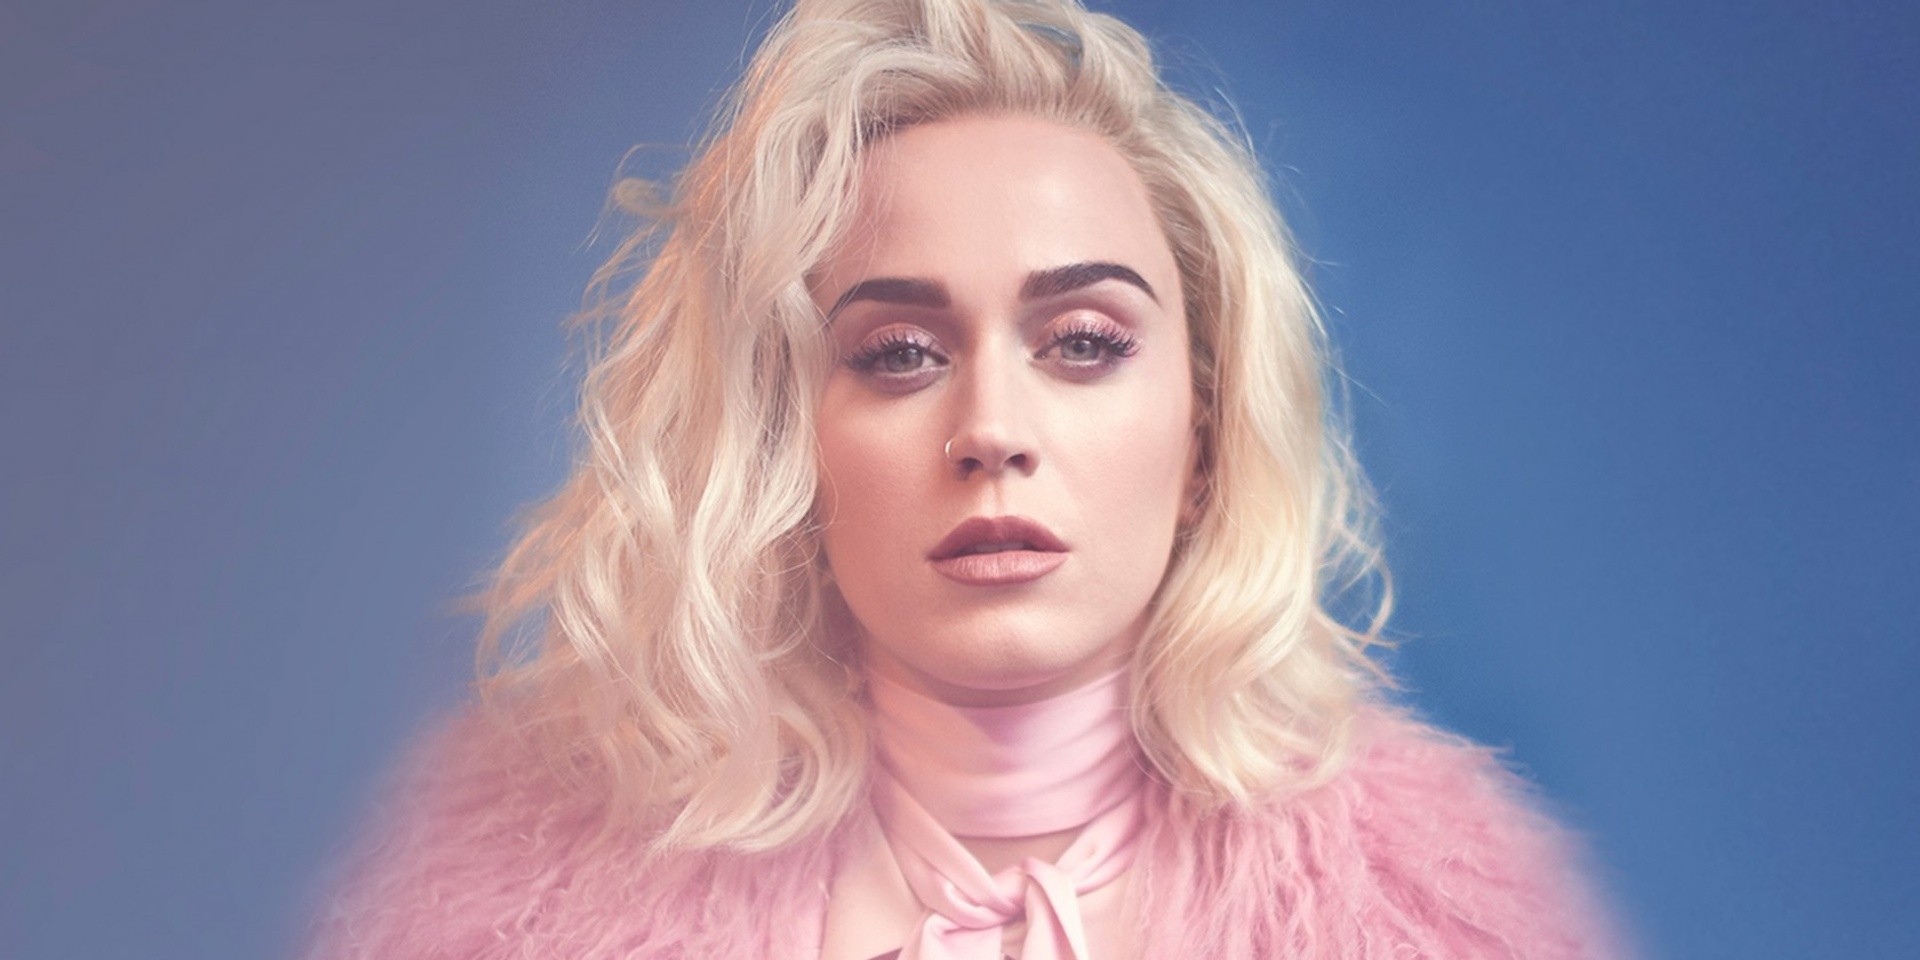 Katy Perry to tour Asia in 2018 – Singapore, Jakarta, Bangkok and more